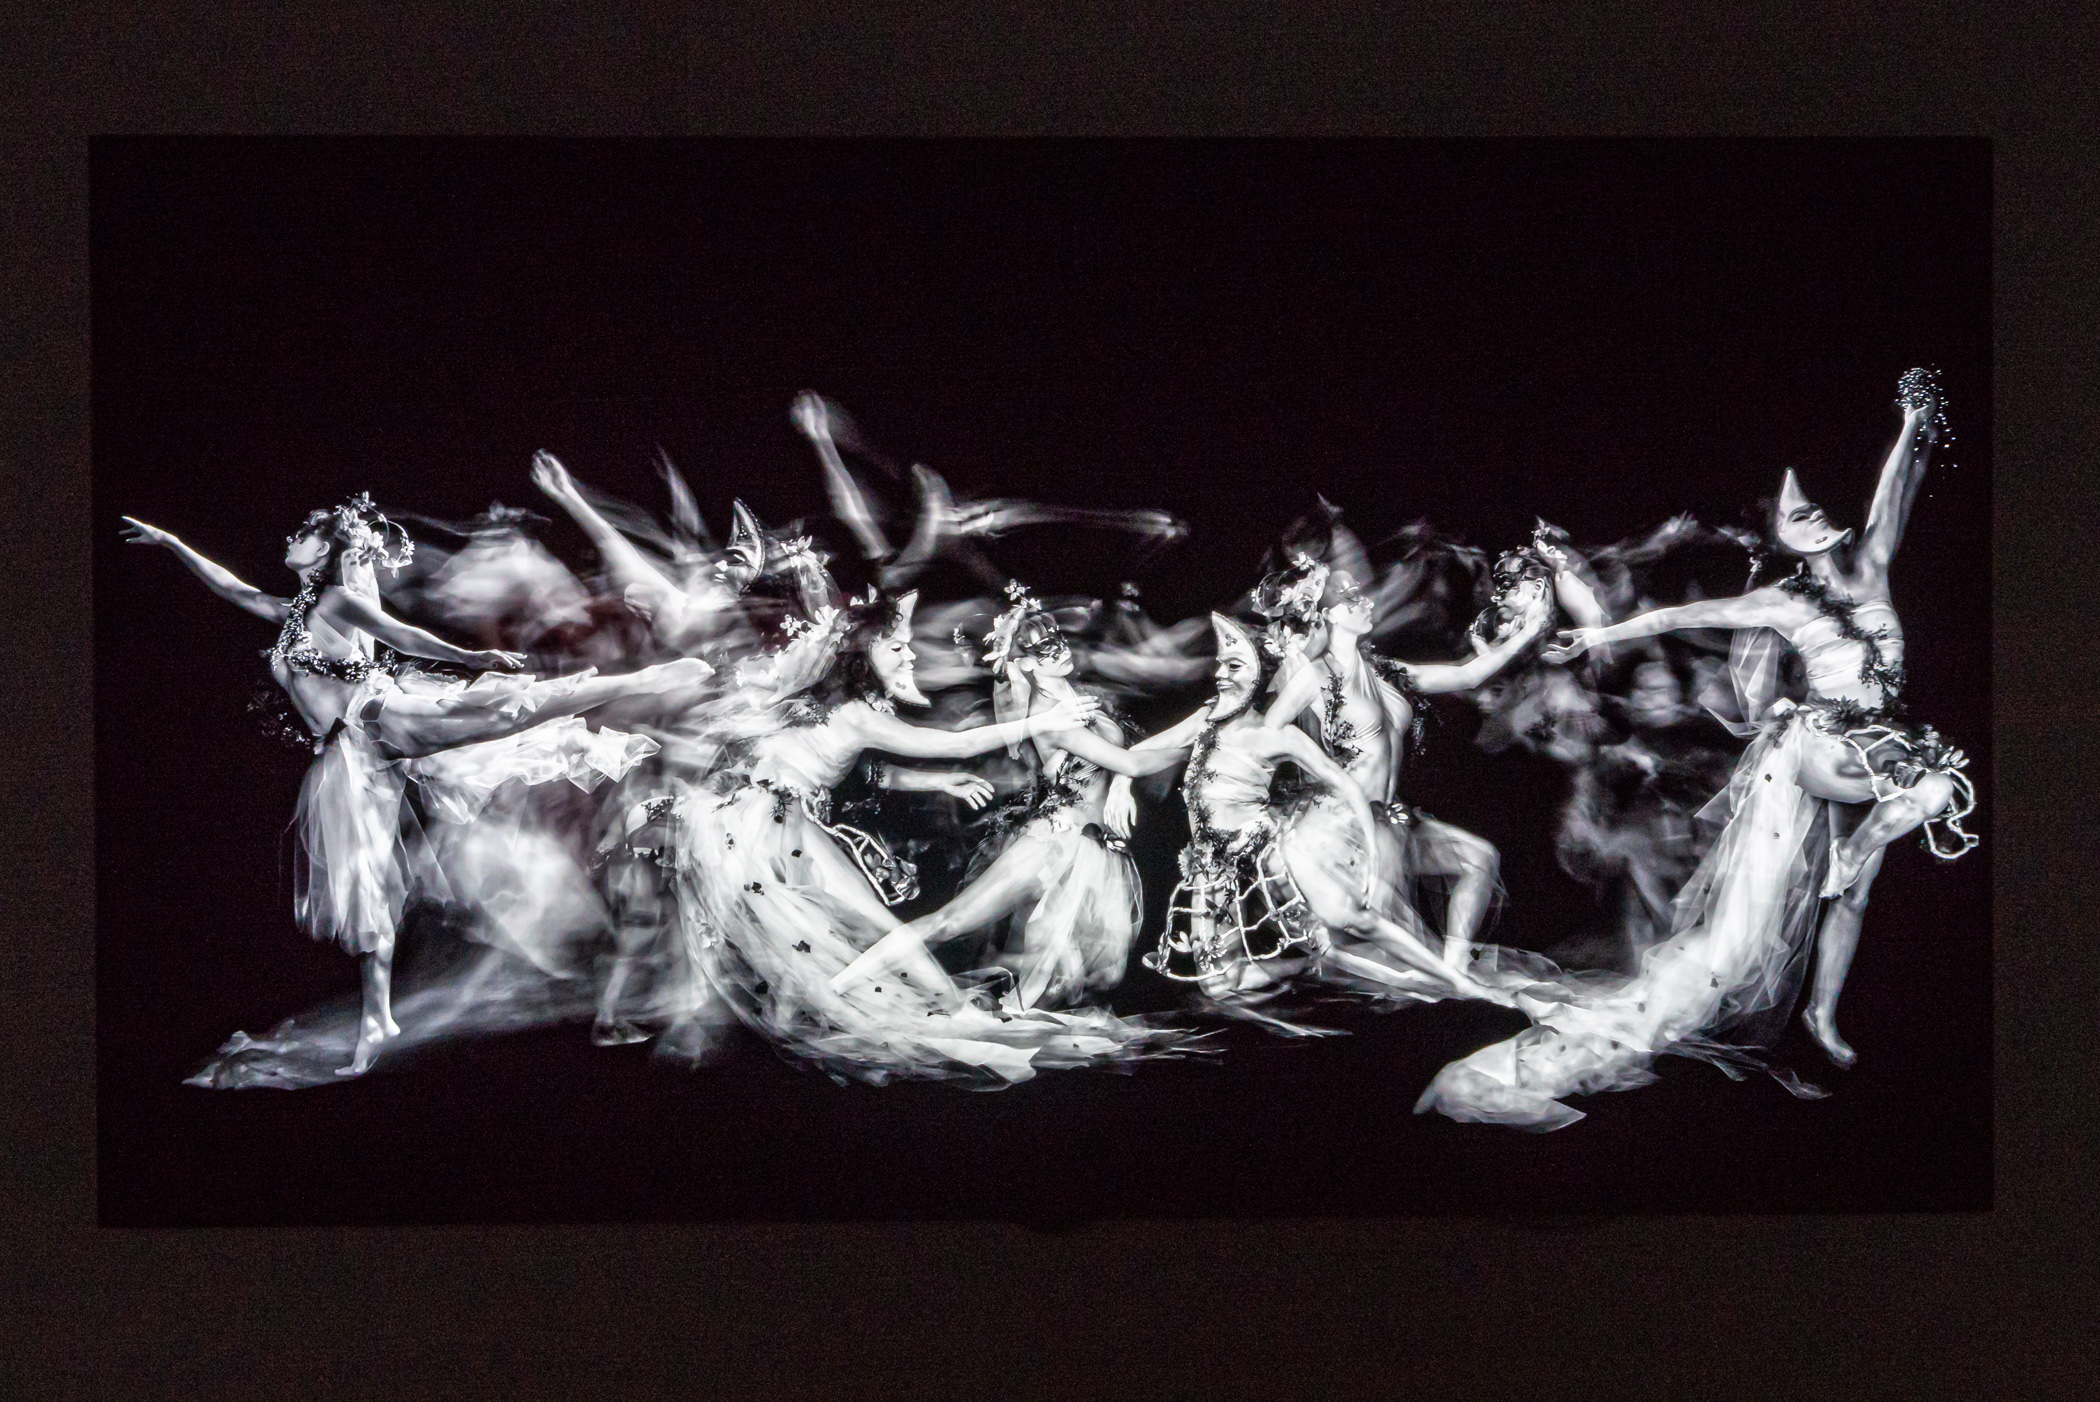 The Dance of Hades, single-panel OLED installation, photographic imagery on 5:00 video loop